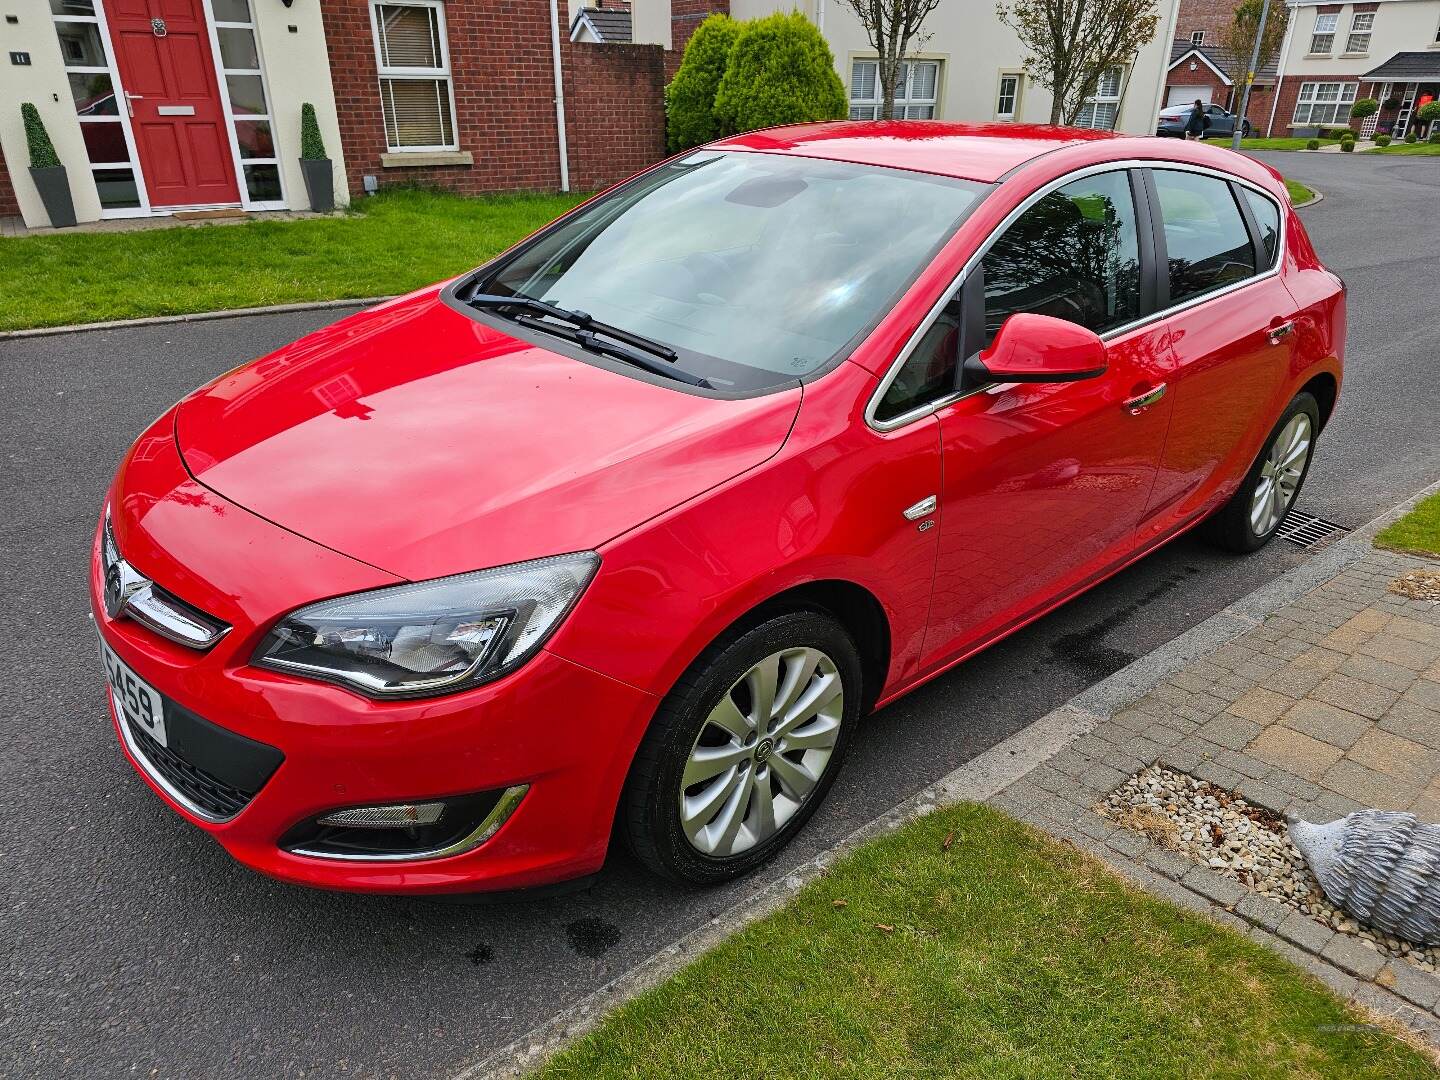 Vauxhall Astra HATCHBACK in Down